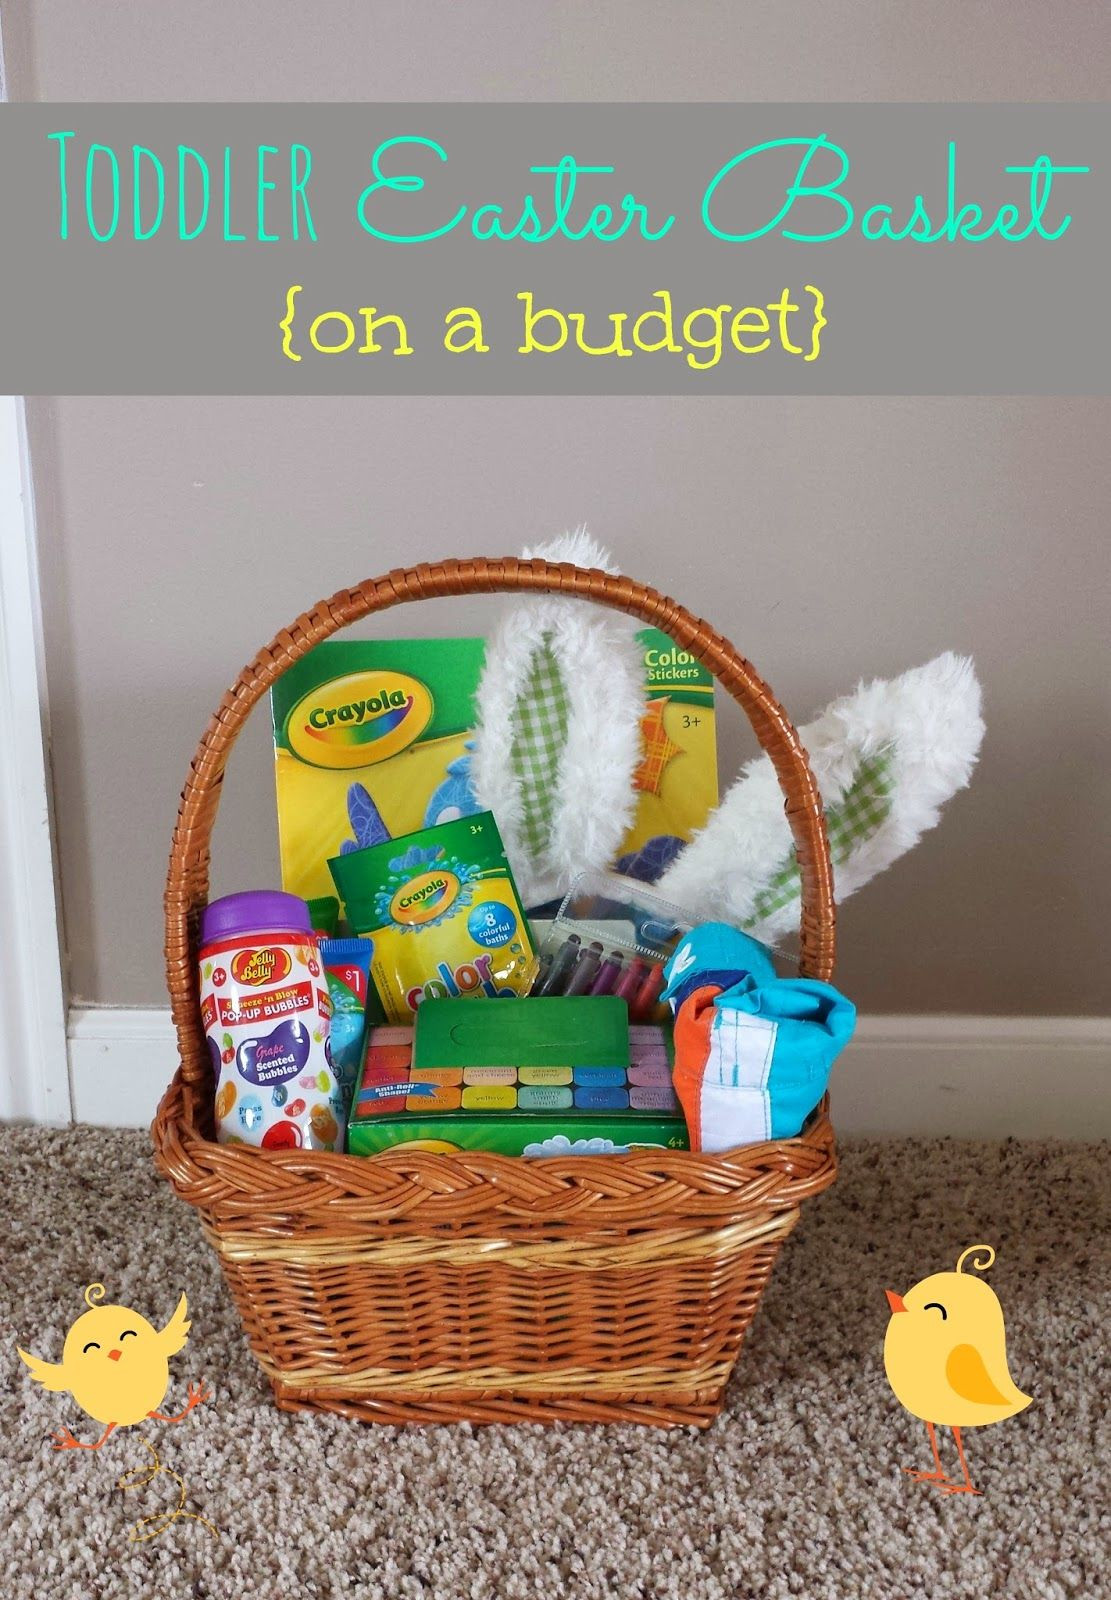 Gift Ideas For Baby'S First Easter
 Toddler Easter Basket Ideas on a bud